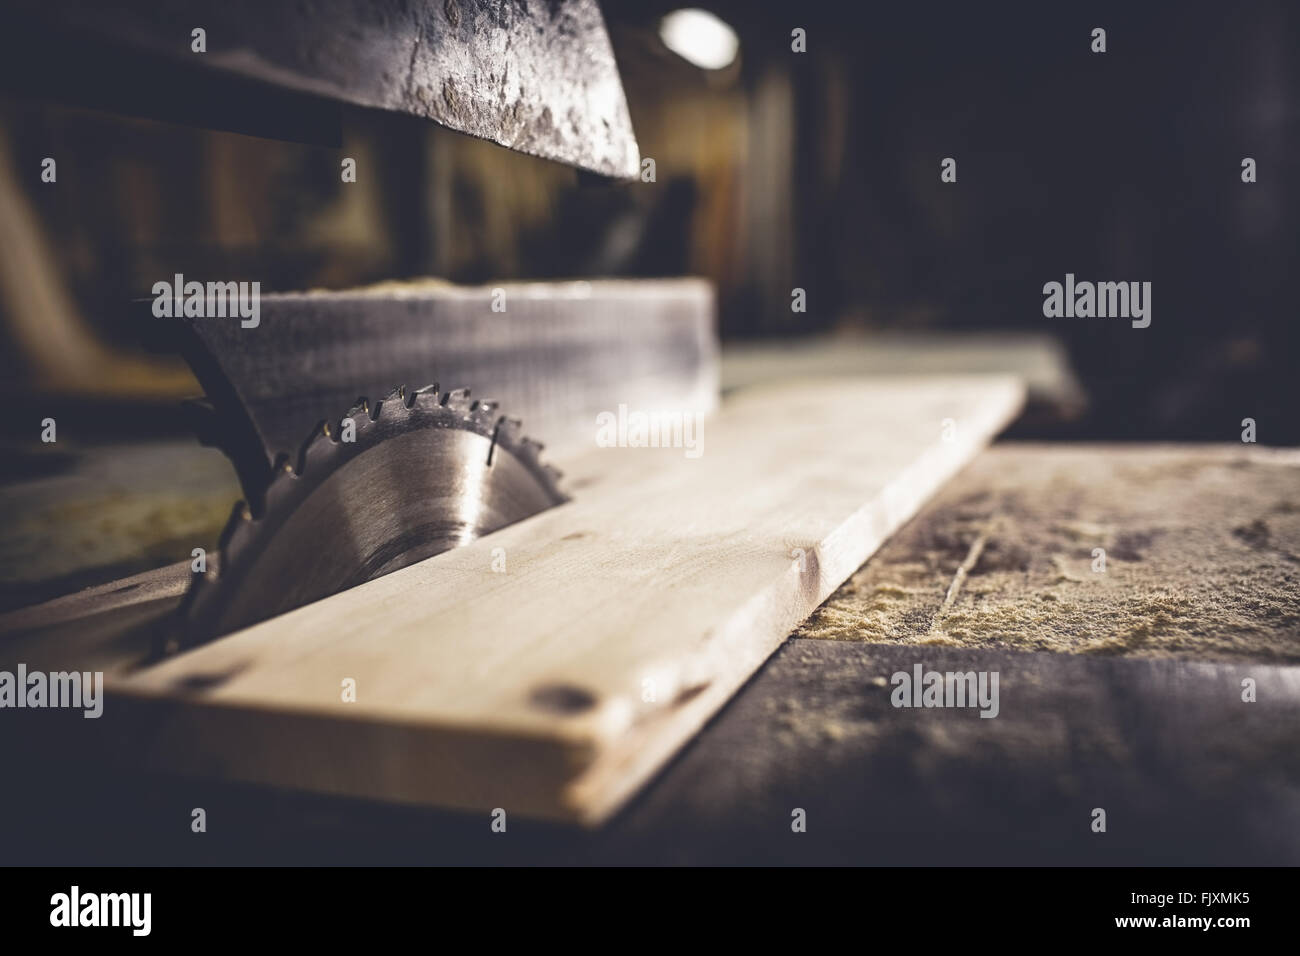 Saw sawing plank of wood Stock Photo